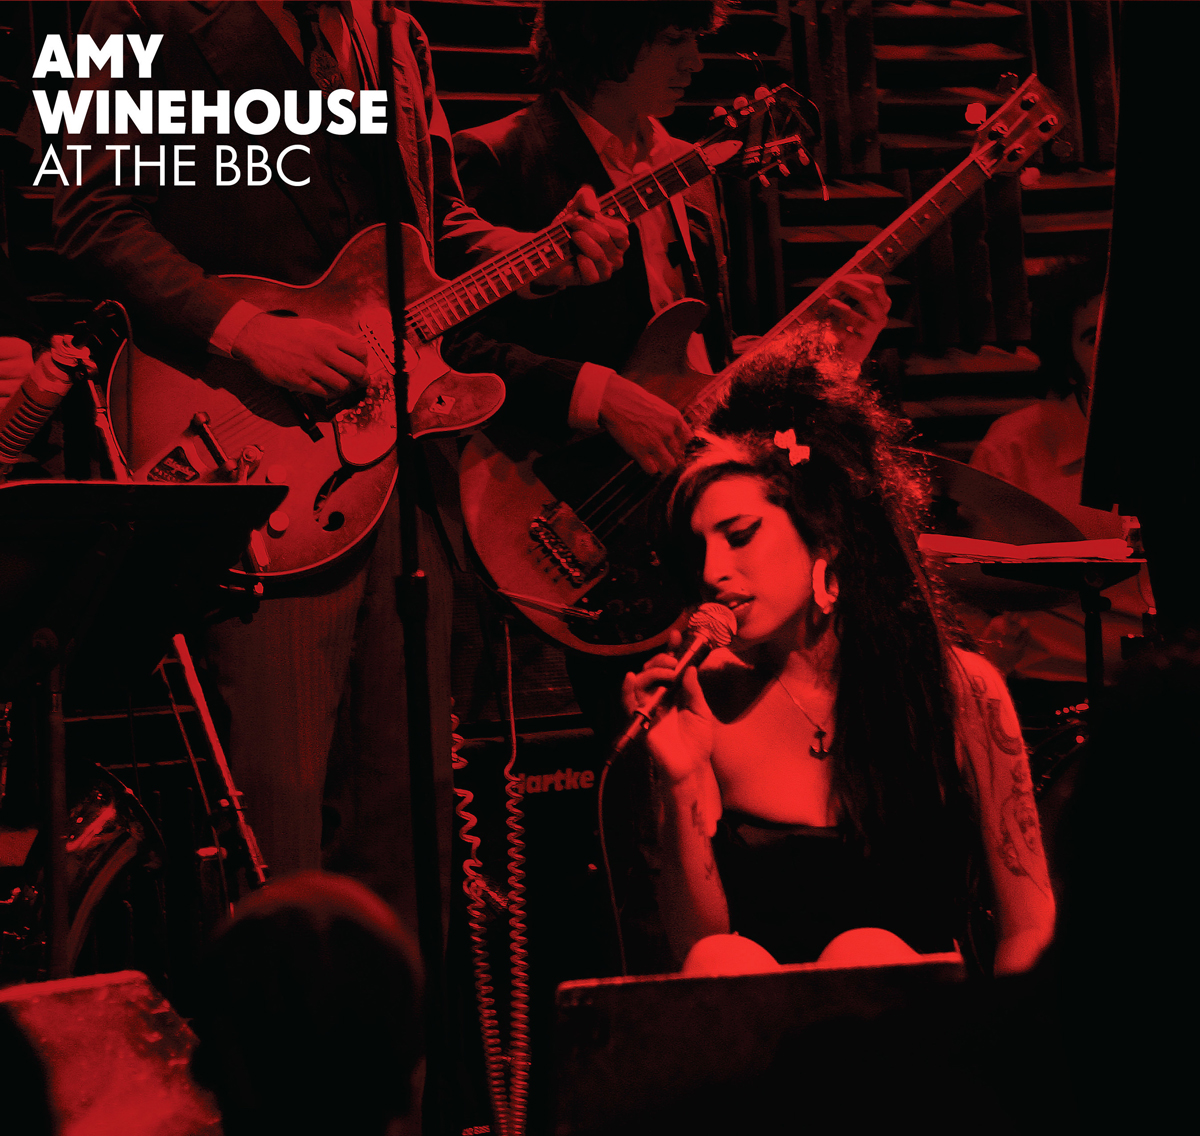 Two Big Amy Winehouse Box Sets Are Coming This Holiday Season